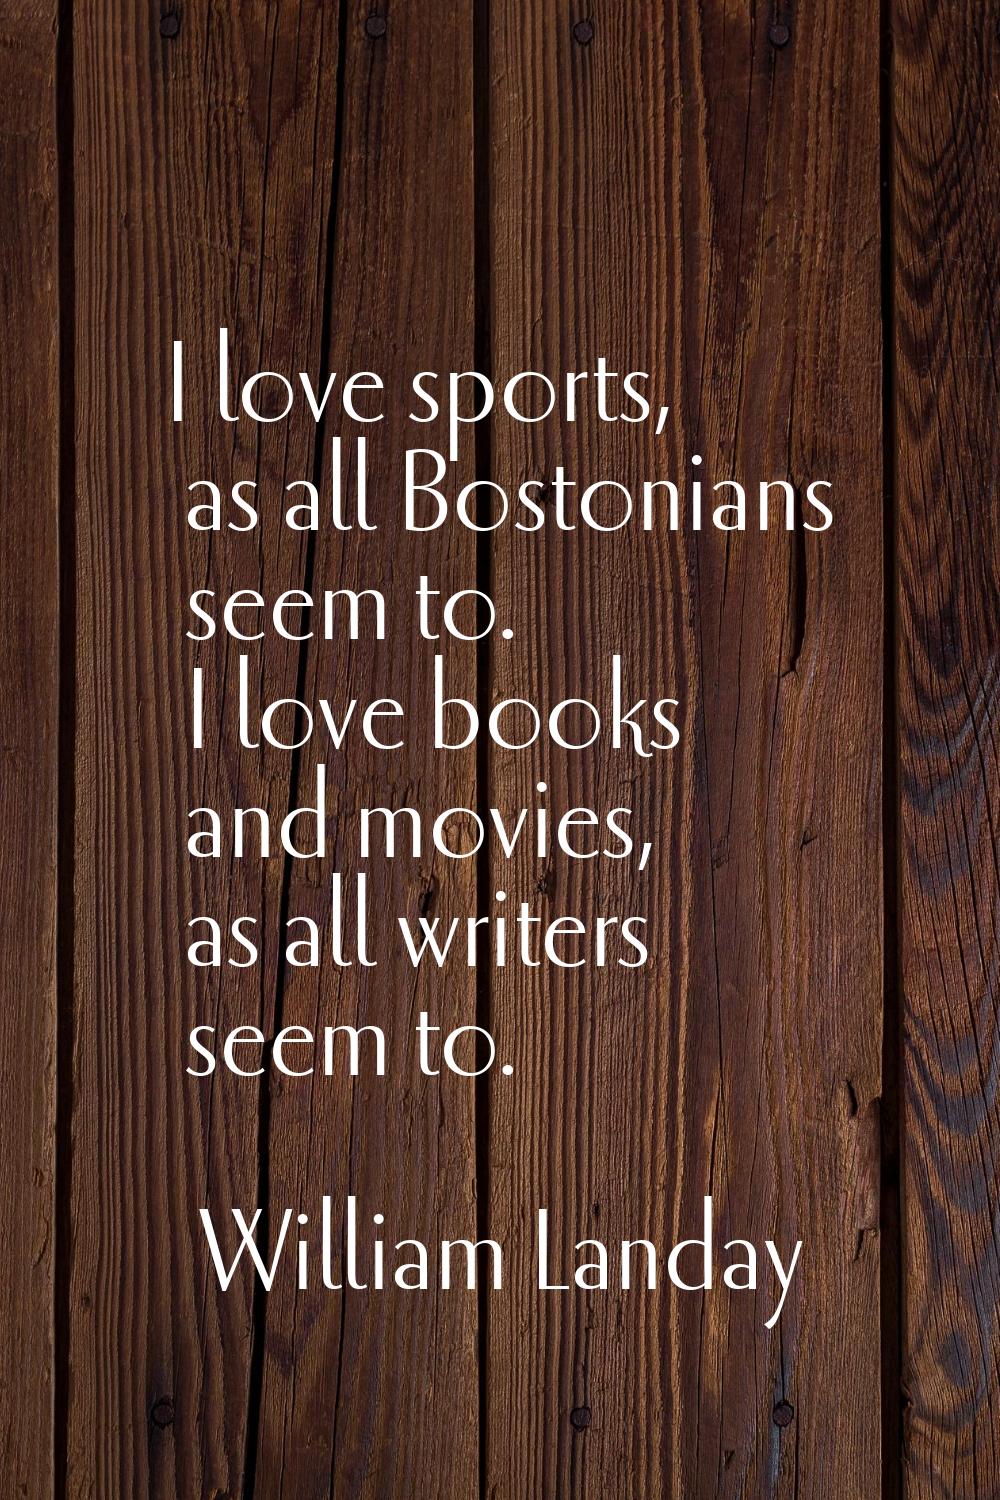 I love sports, as all Bostonians seem to. I love books and movies, as all writers seem to.